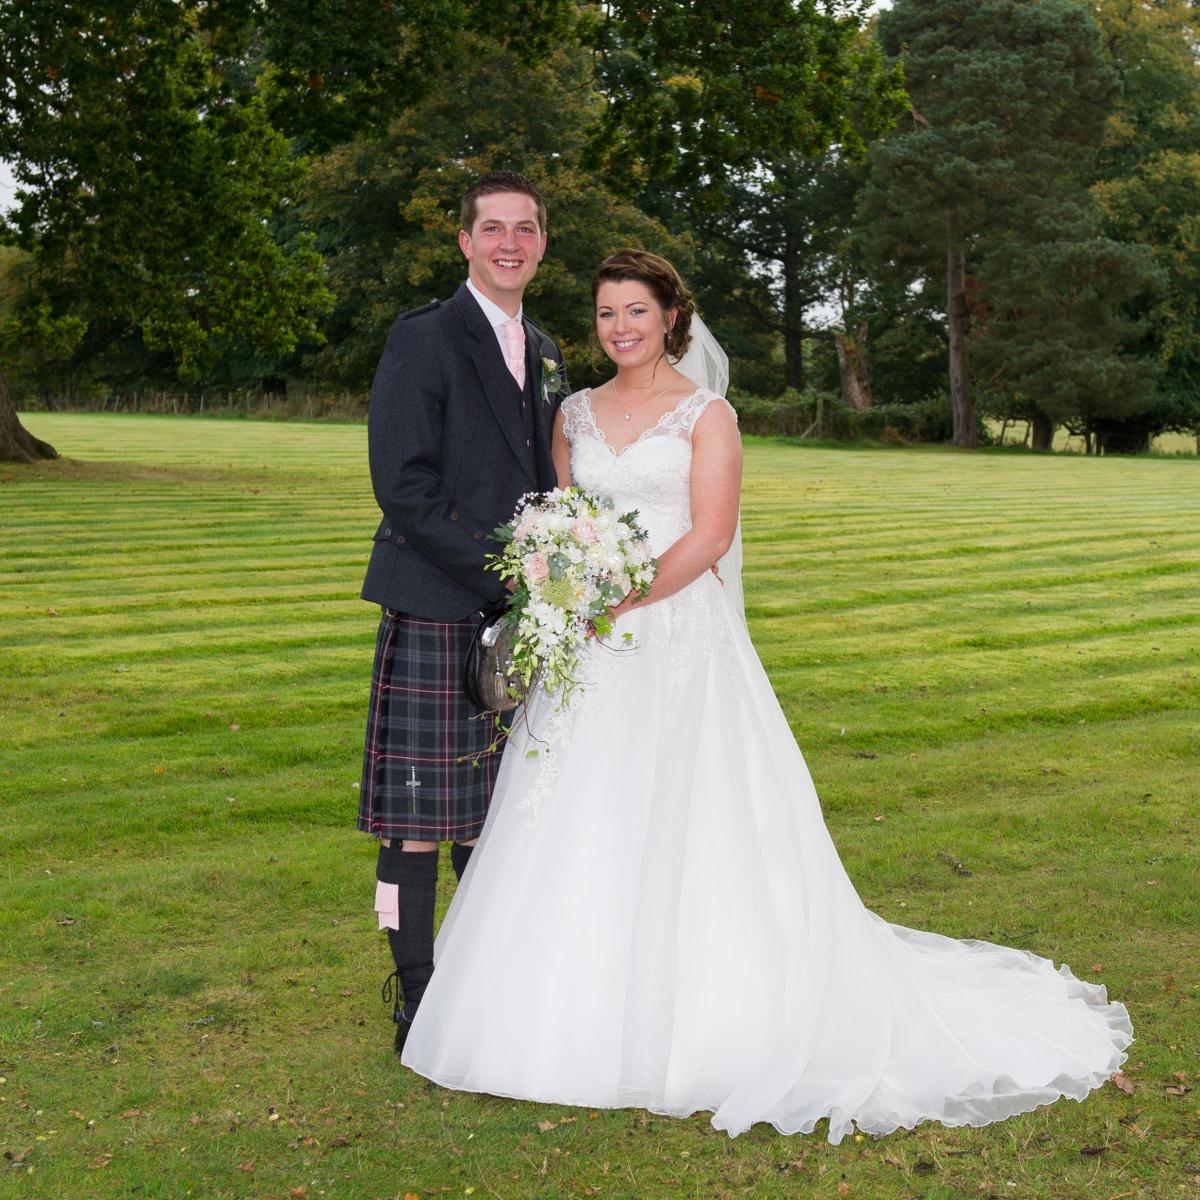 Gemma Dickson formally of Cladance, Chapelton, Strathaven, married George Hodge of Gilkerscleugh Mains, Abington, Biggar, at Glenbervie House, Larbert